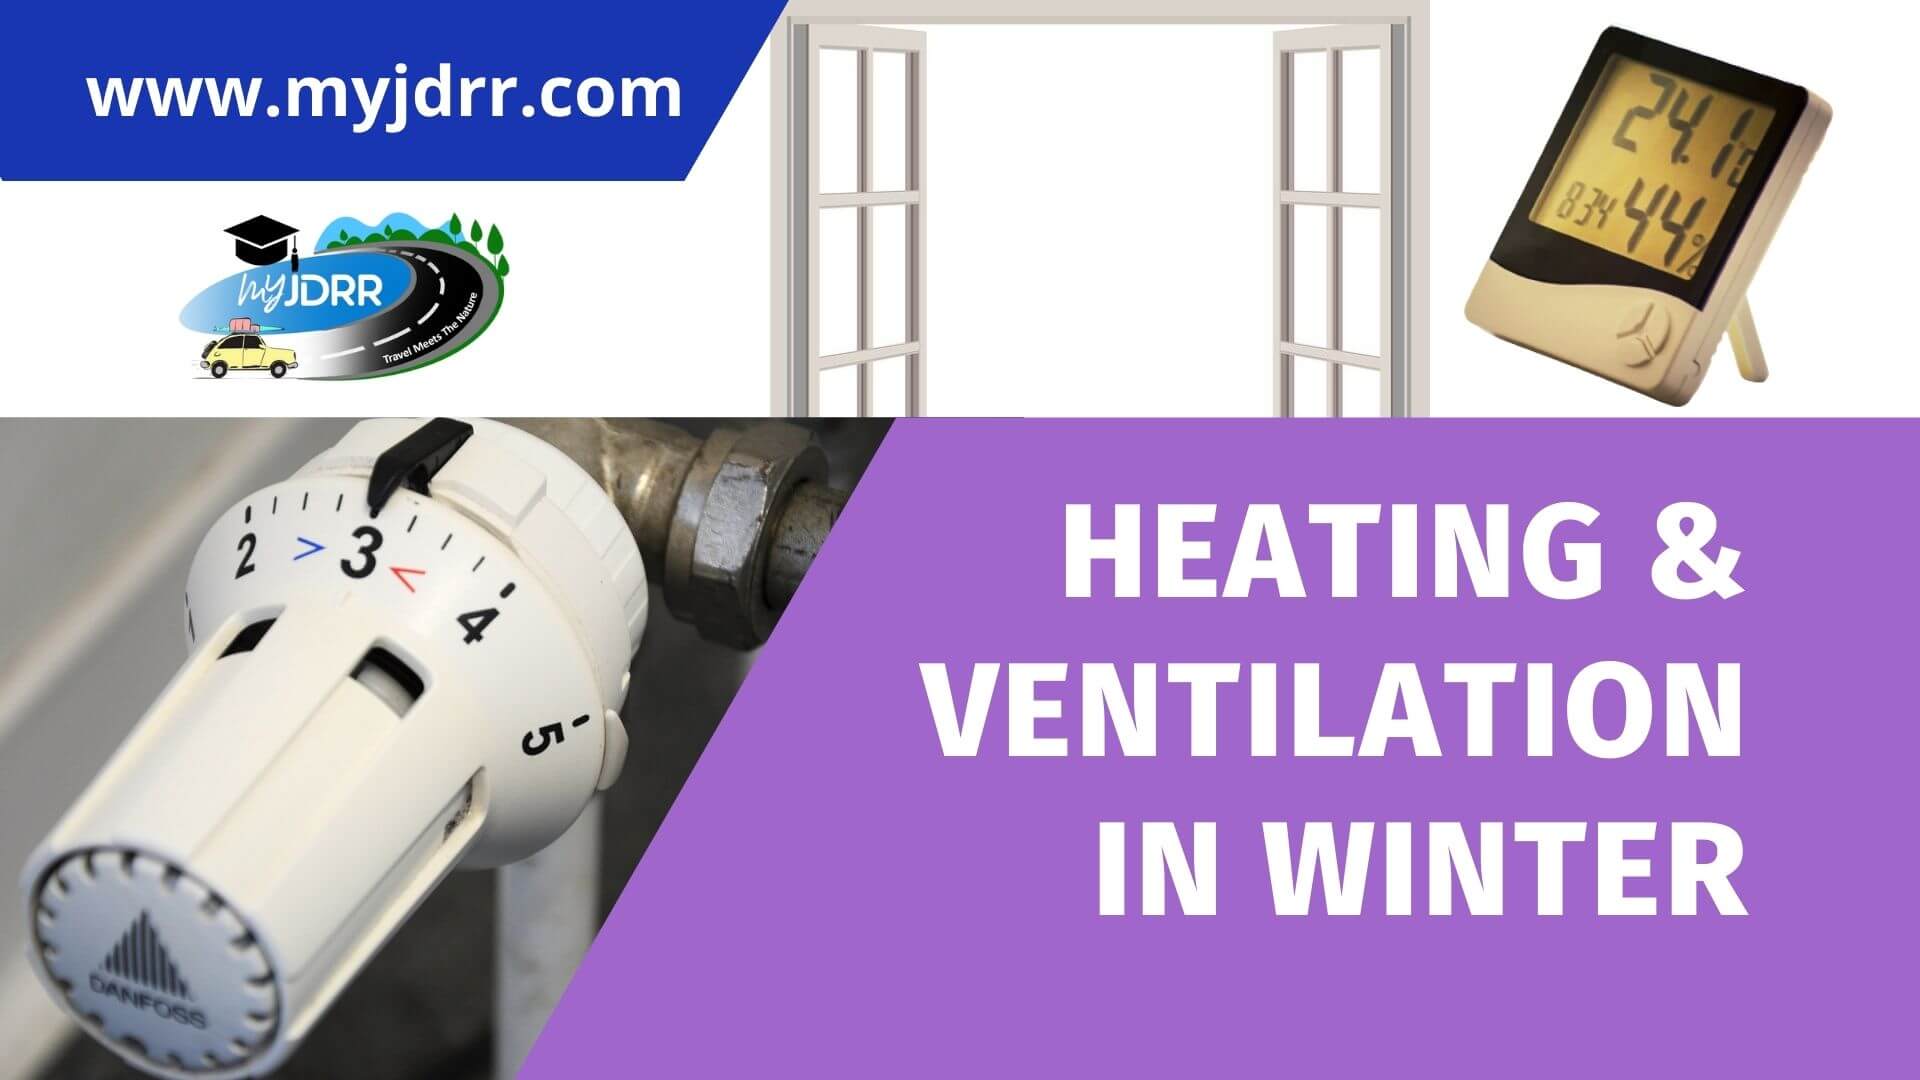 How to correctly heat and ventilate the house during winter